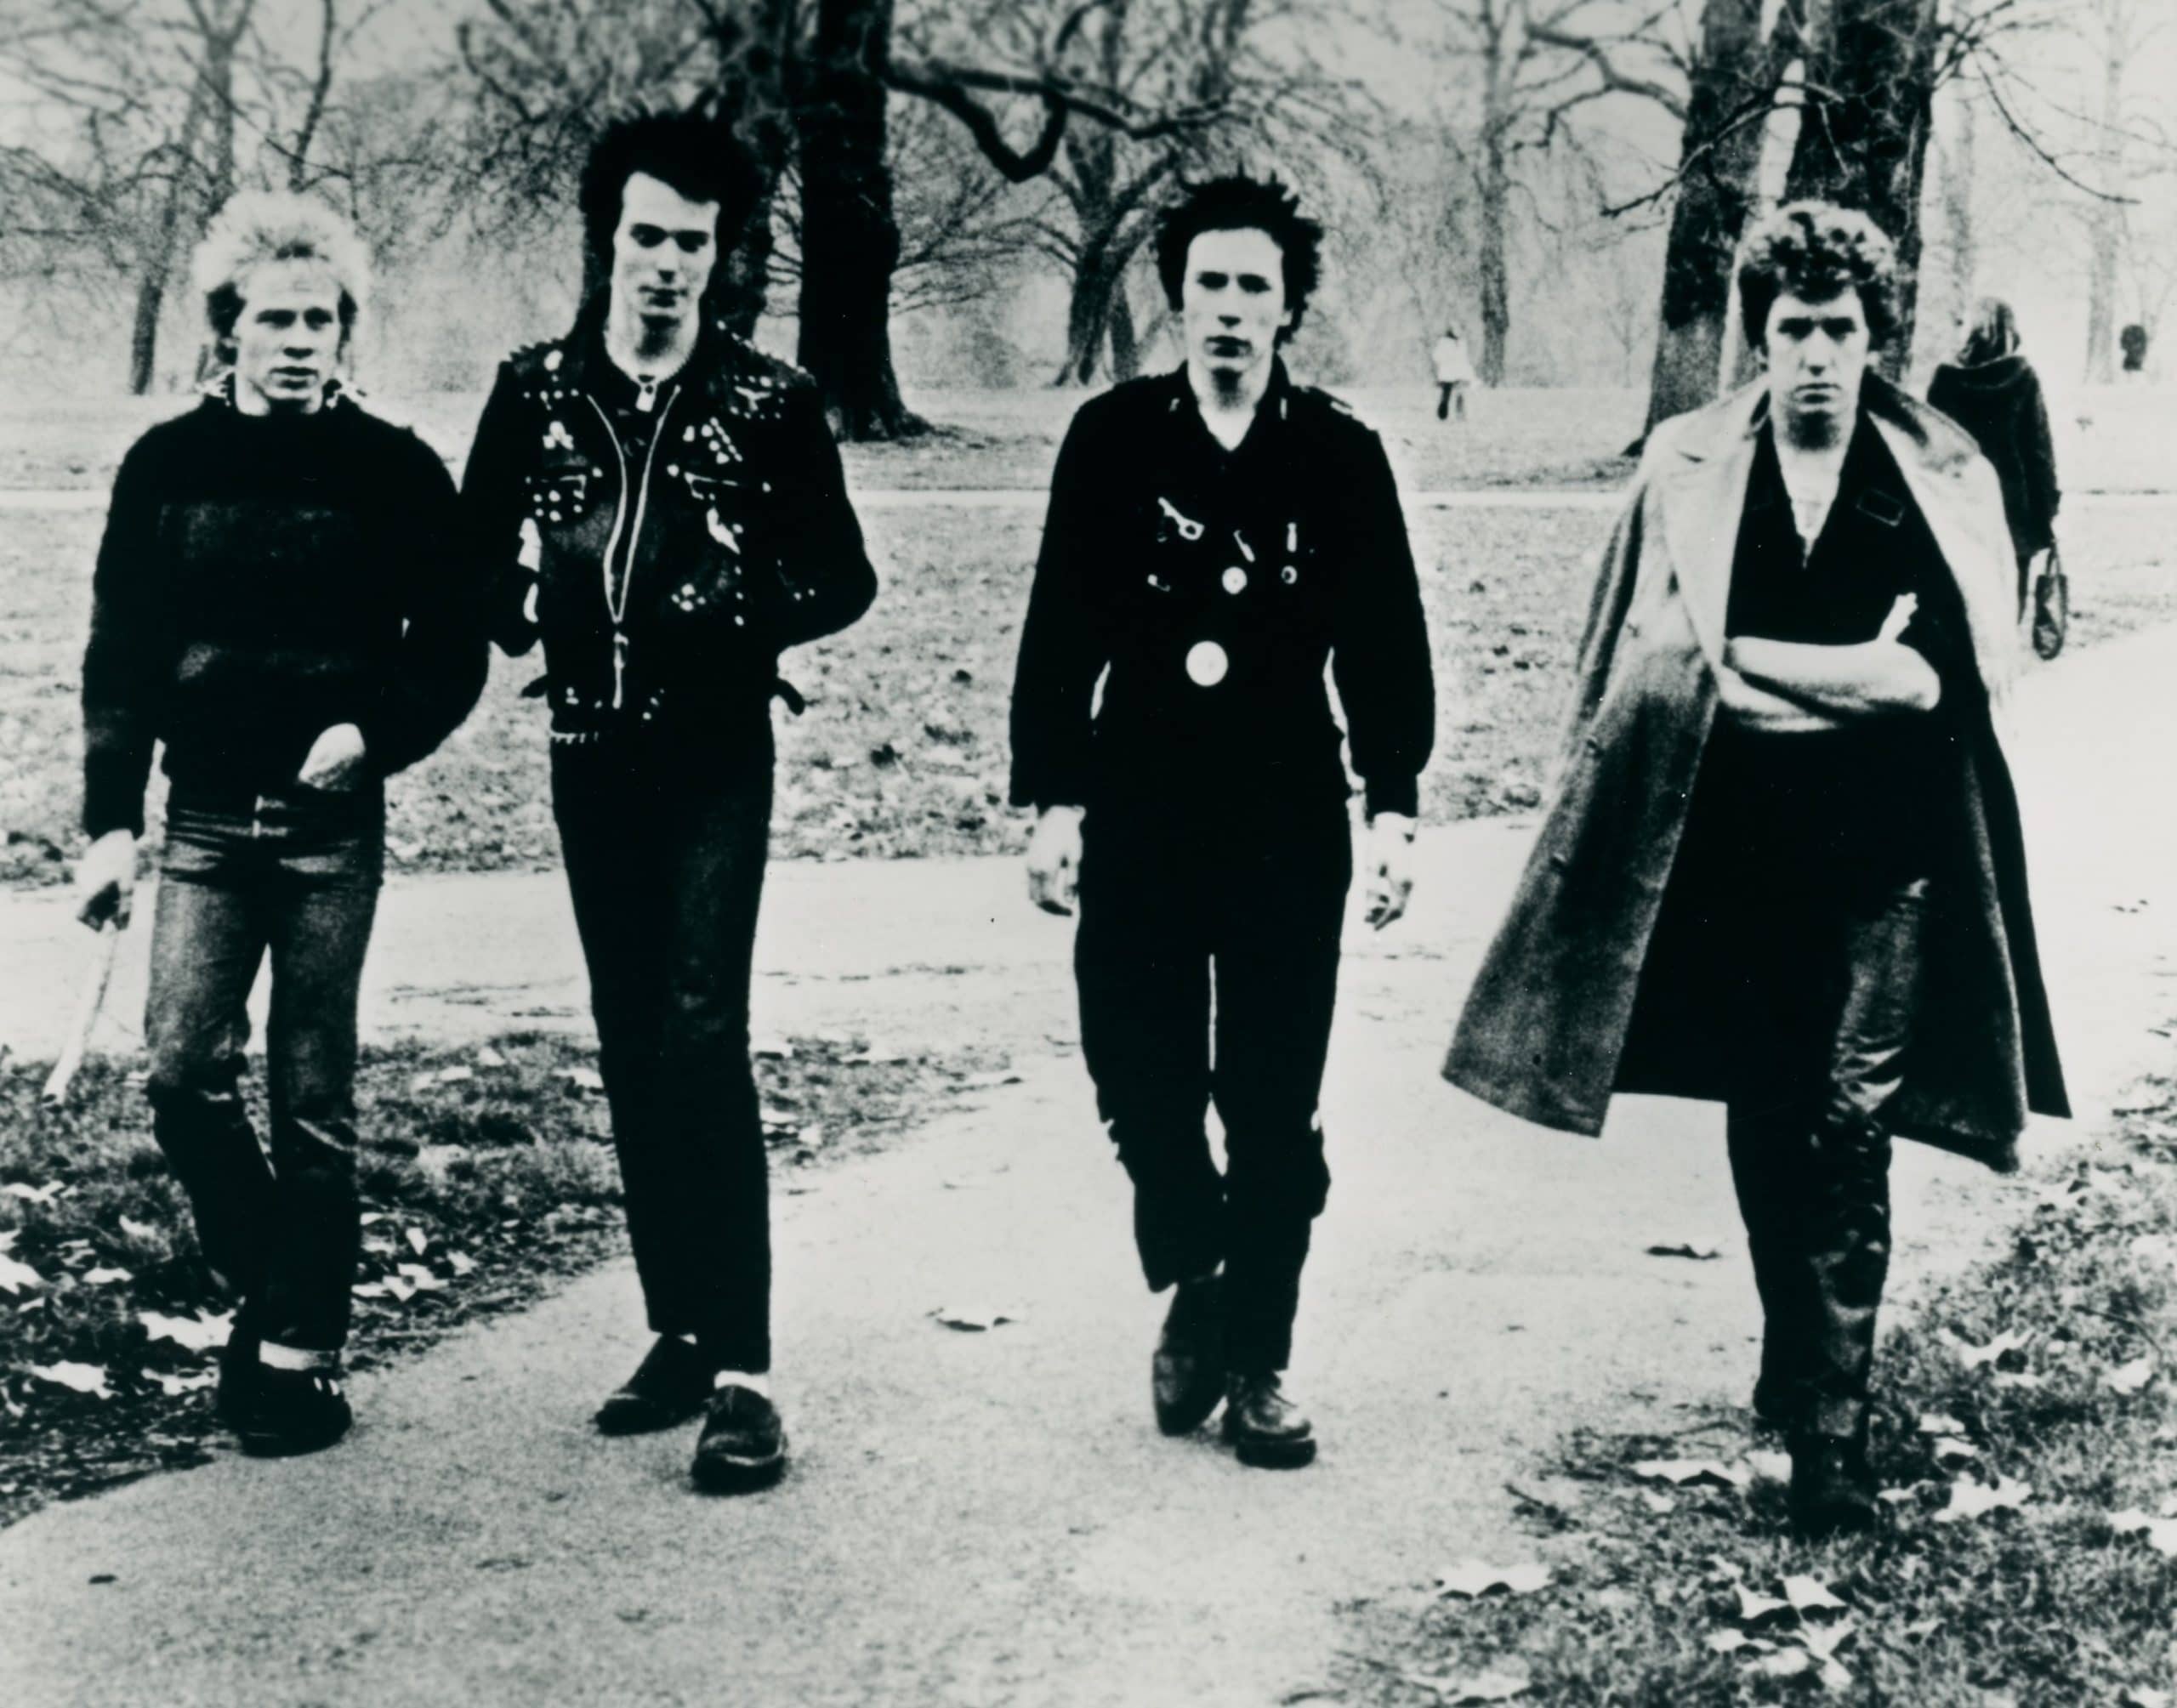 FILTH AND THE FURY, Paul Cook, Johnny Rotten, Steve Jones, of The Sex Pistols in 1977, 2000